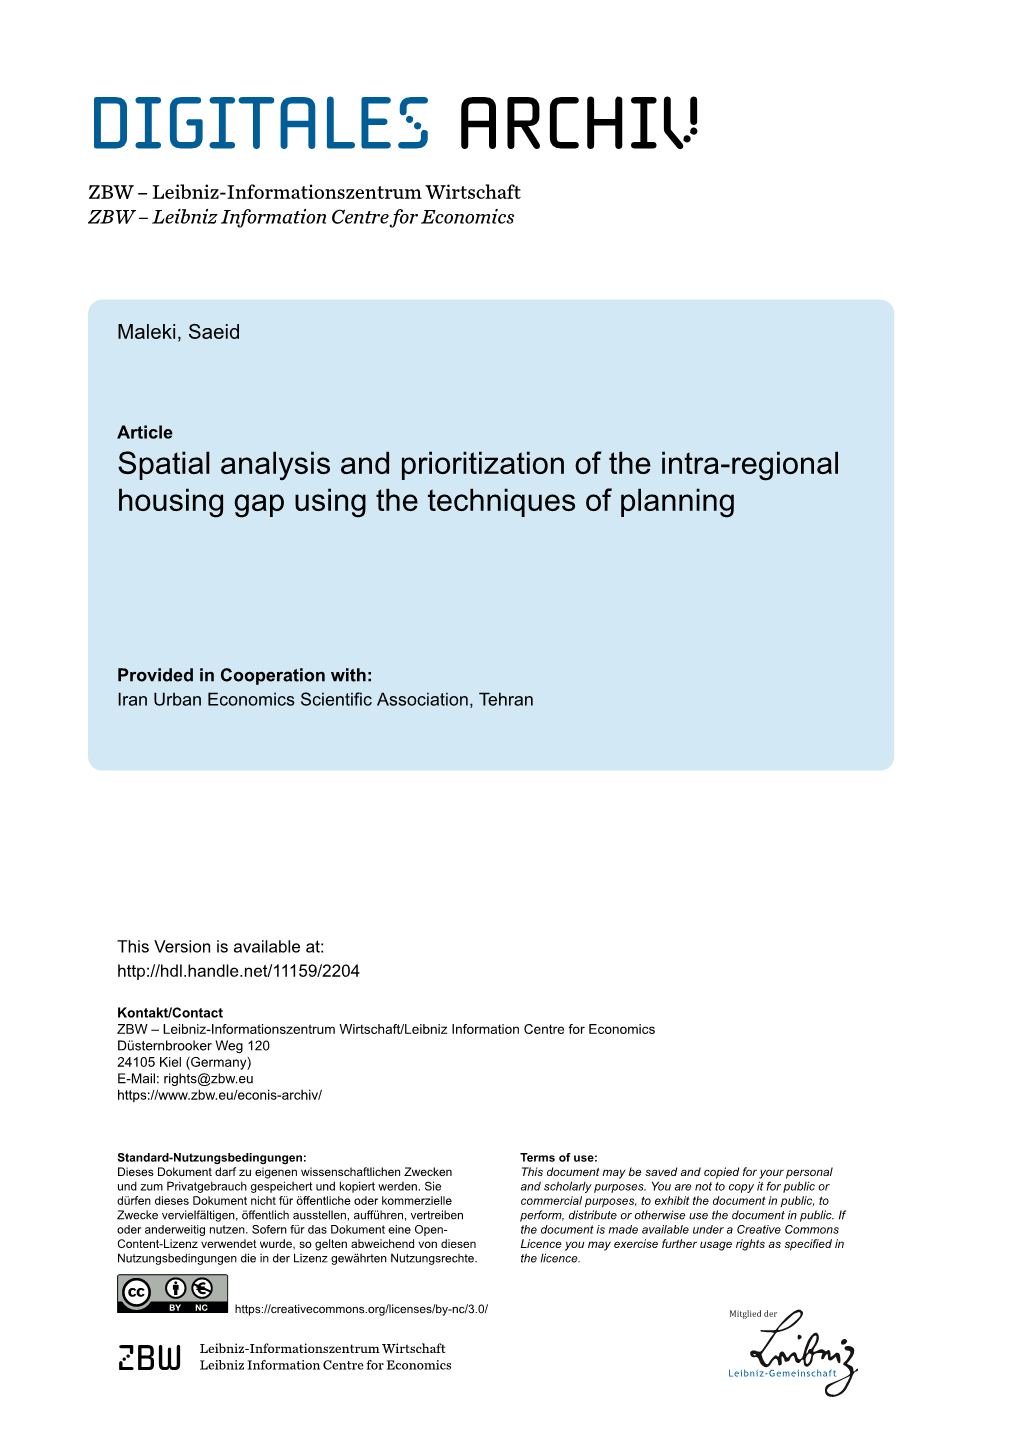 Spatial Analysis and Prioritization of the Intra-Regional Housing Gap Using the Techniques of Planning